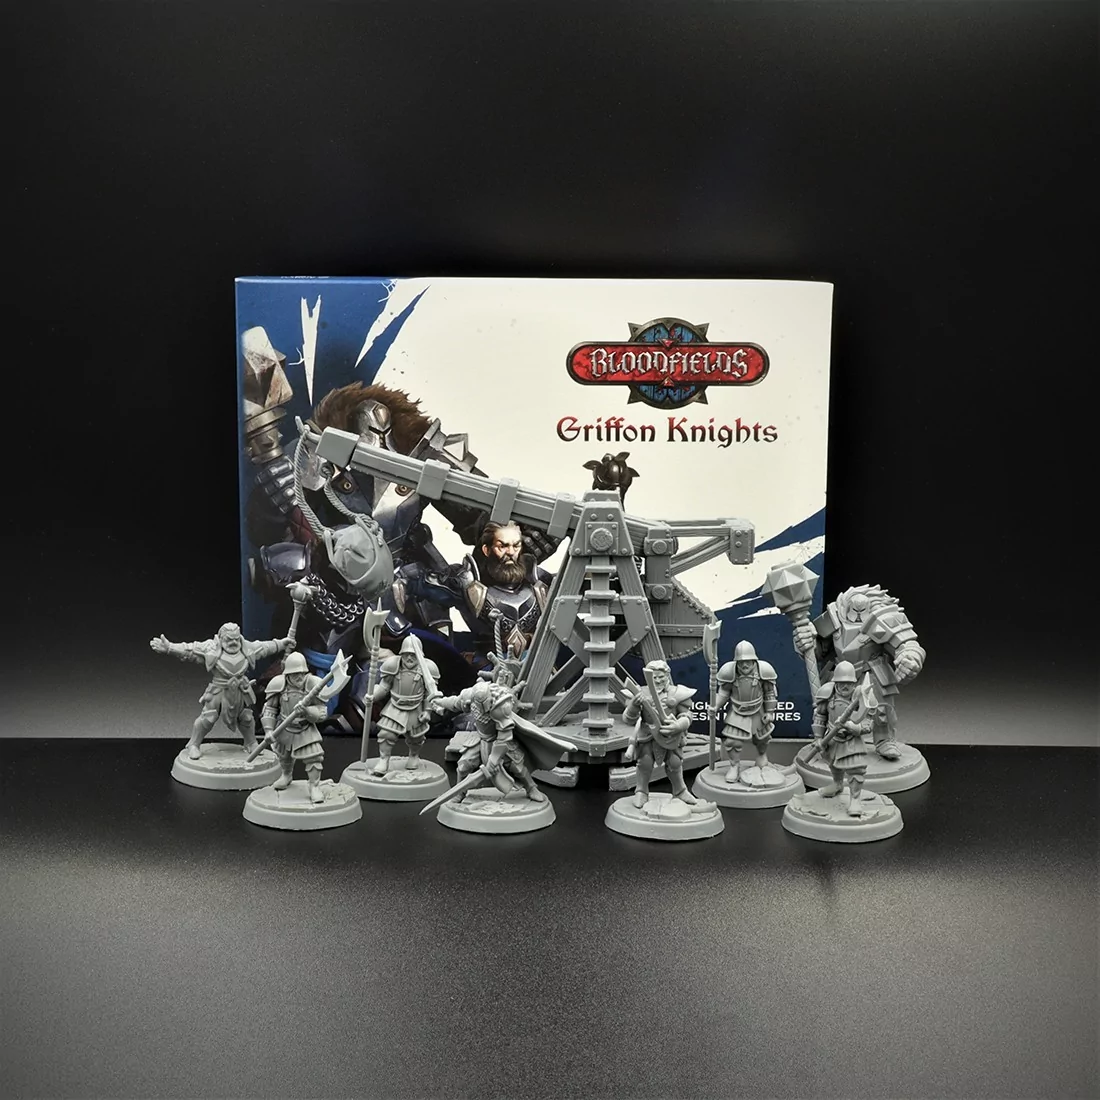 Army pack of fantasy miniatures Griffon Knights - Bloodfields tabletop RPG game